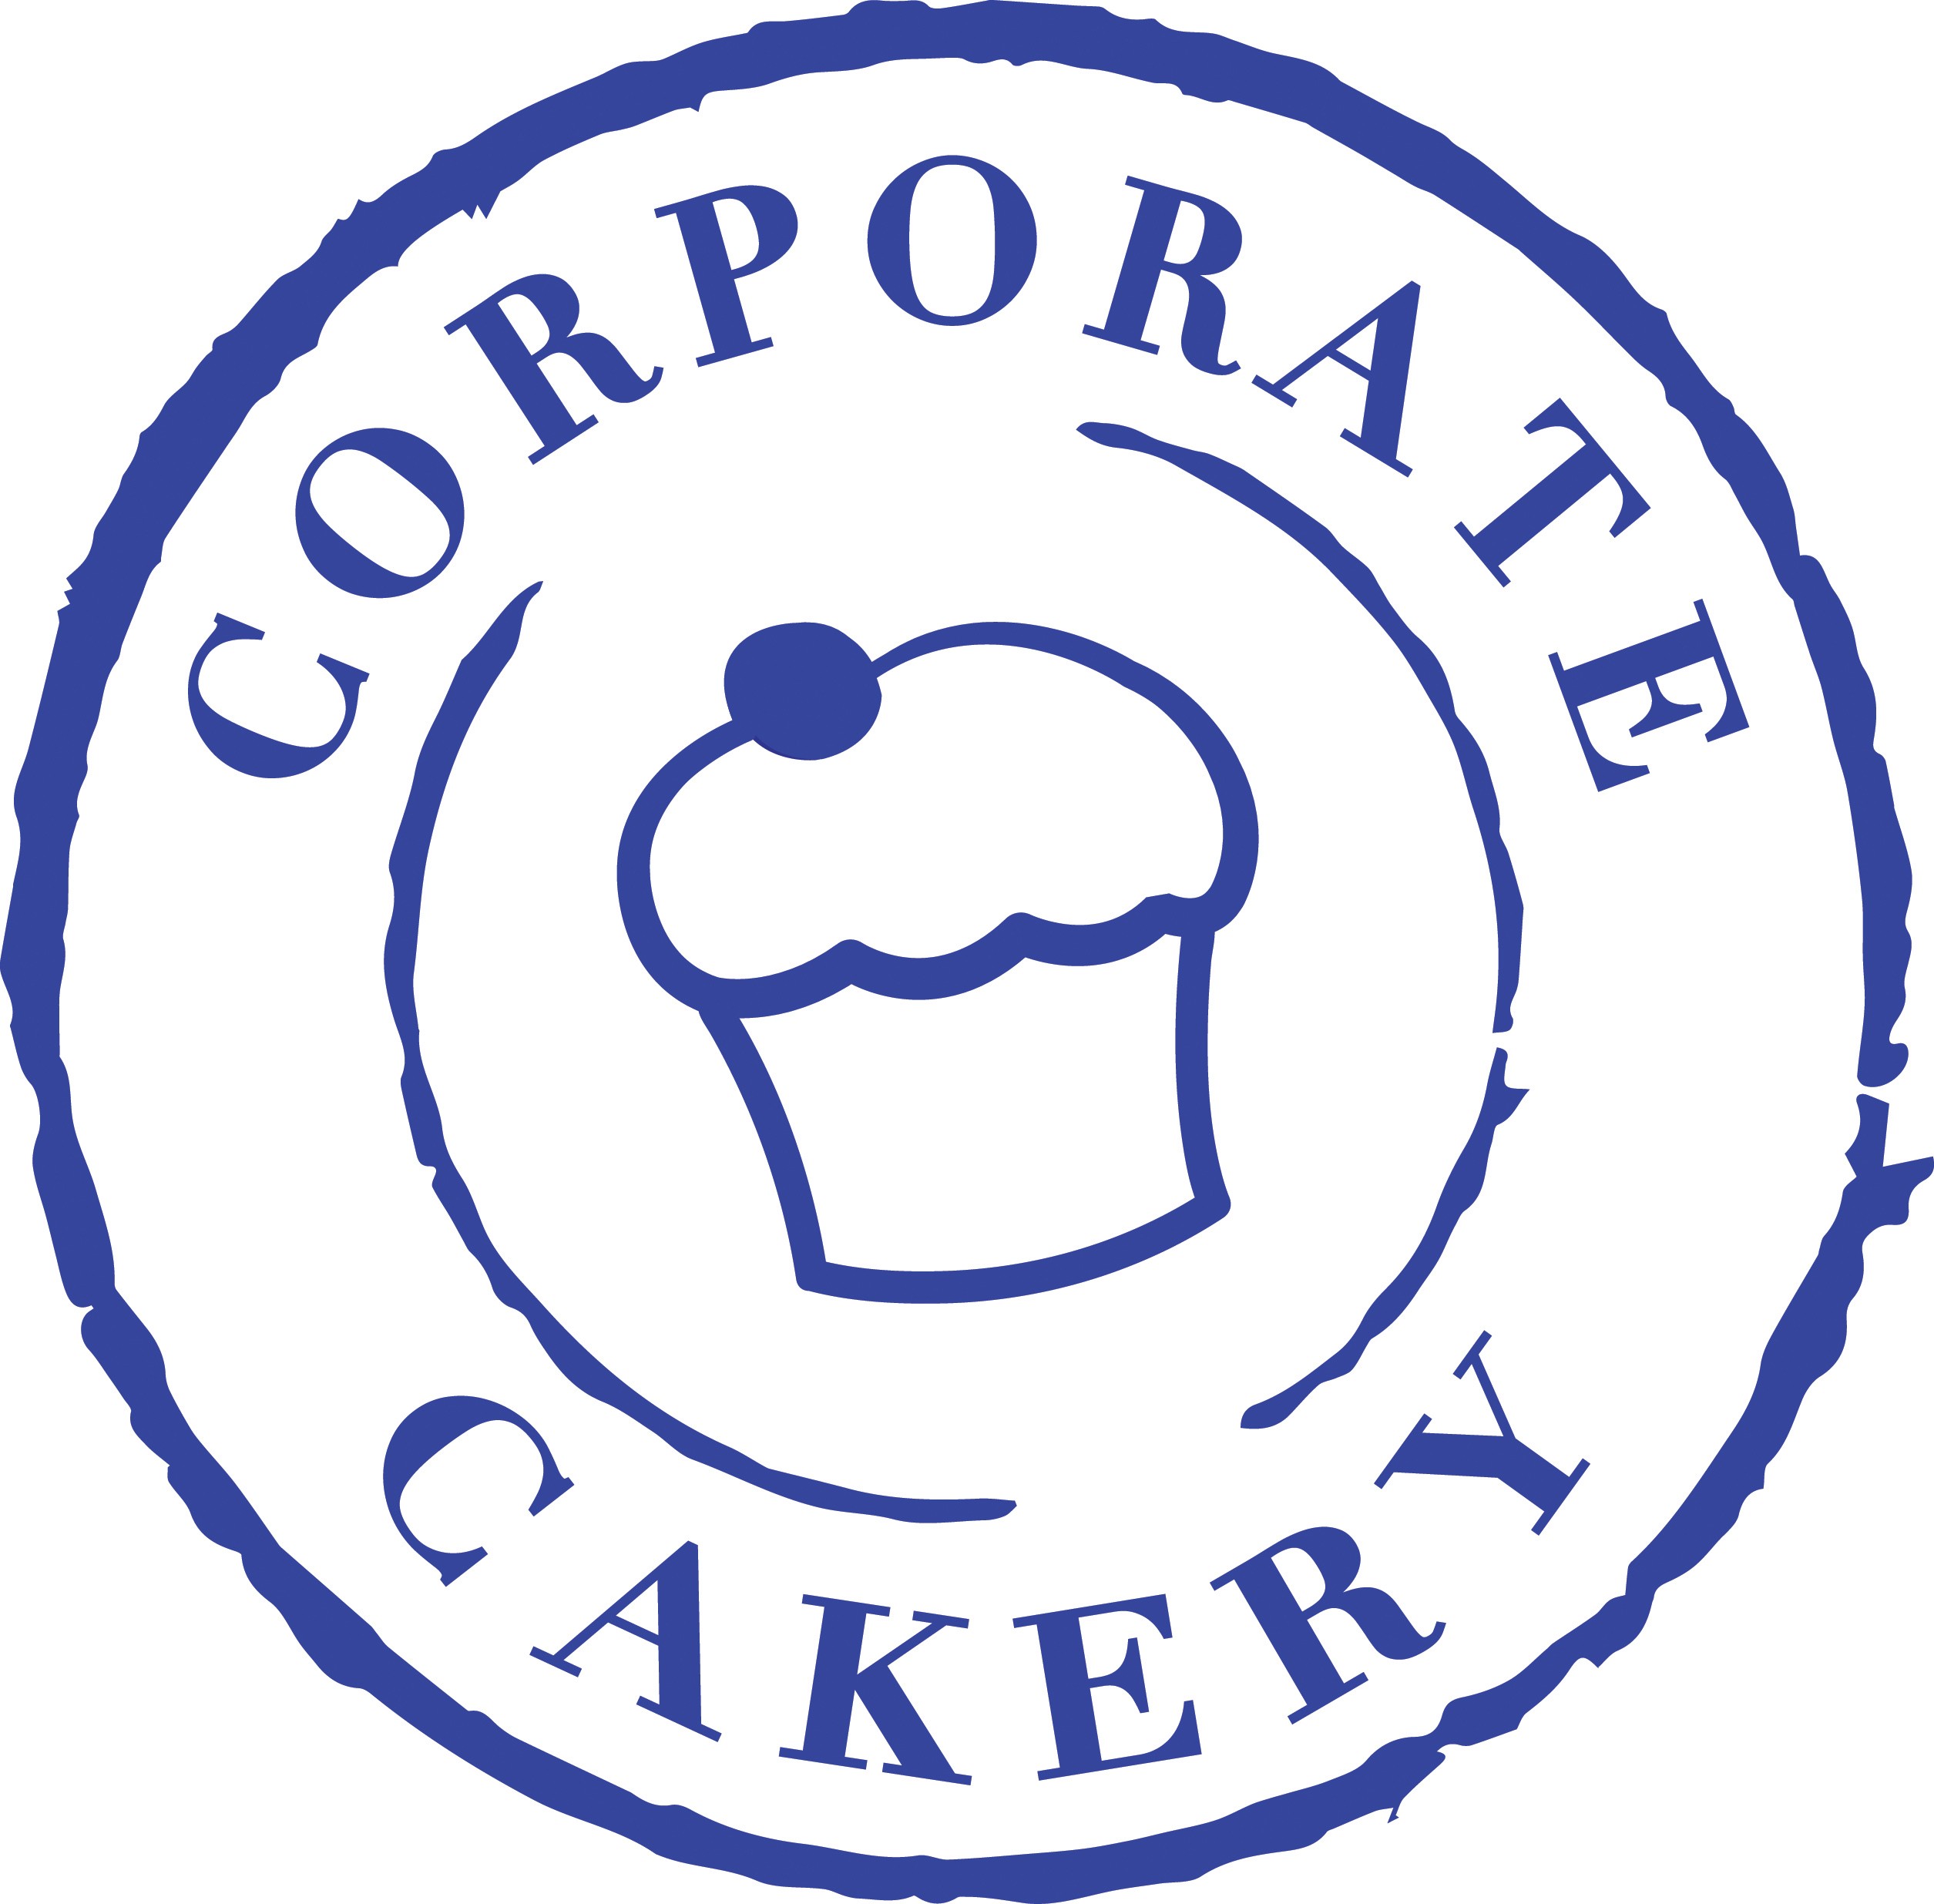 Corporate Cakery allow companies to show how much they care with delicious branded vegan cakes